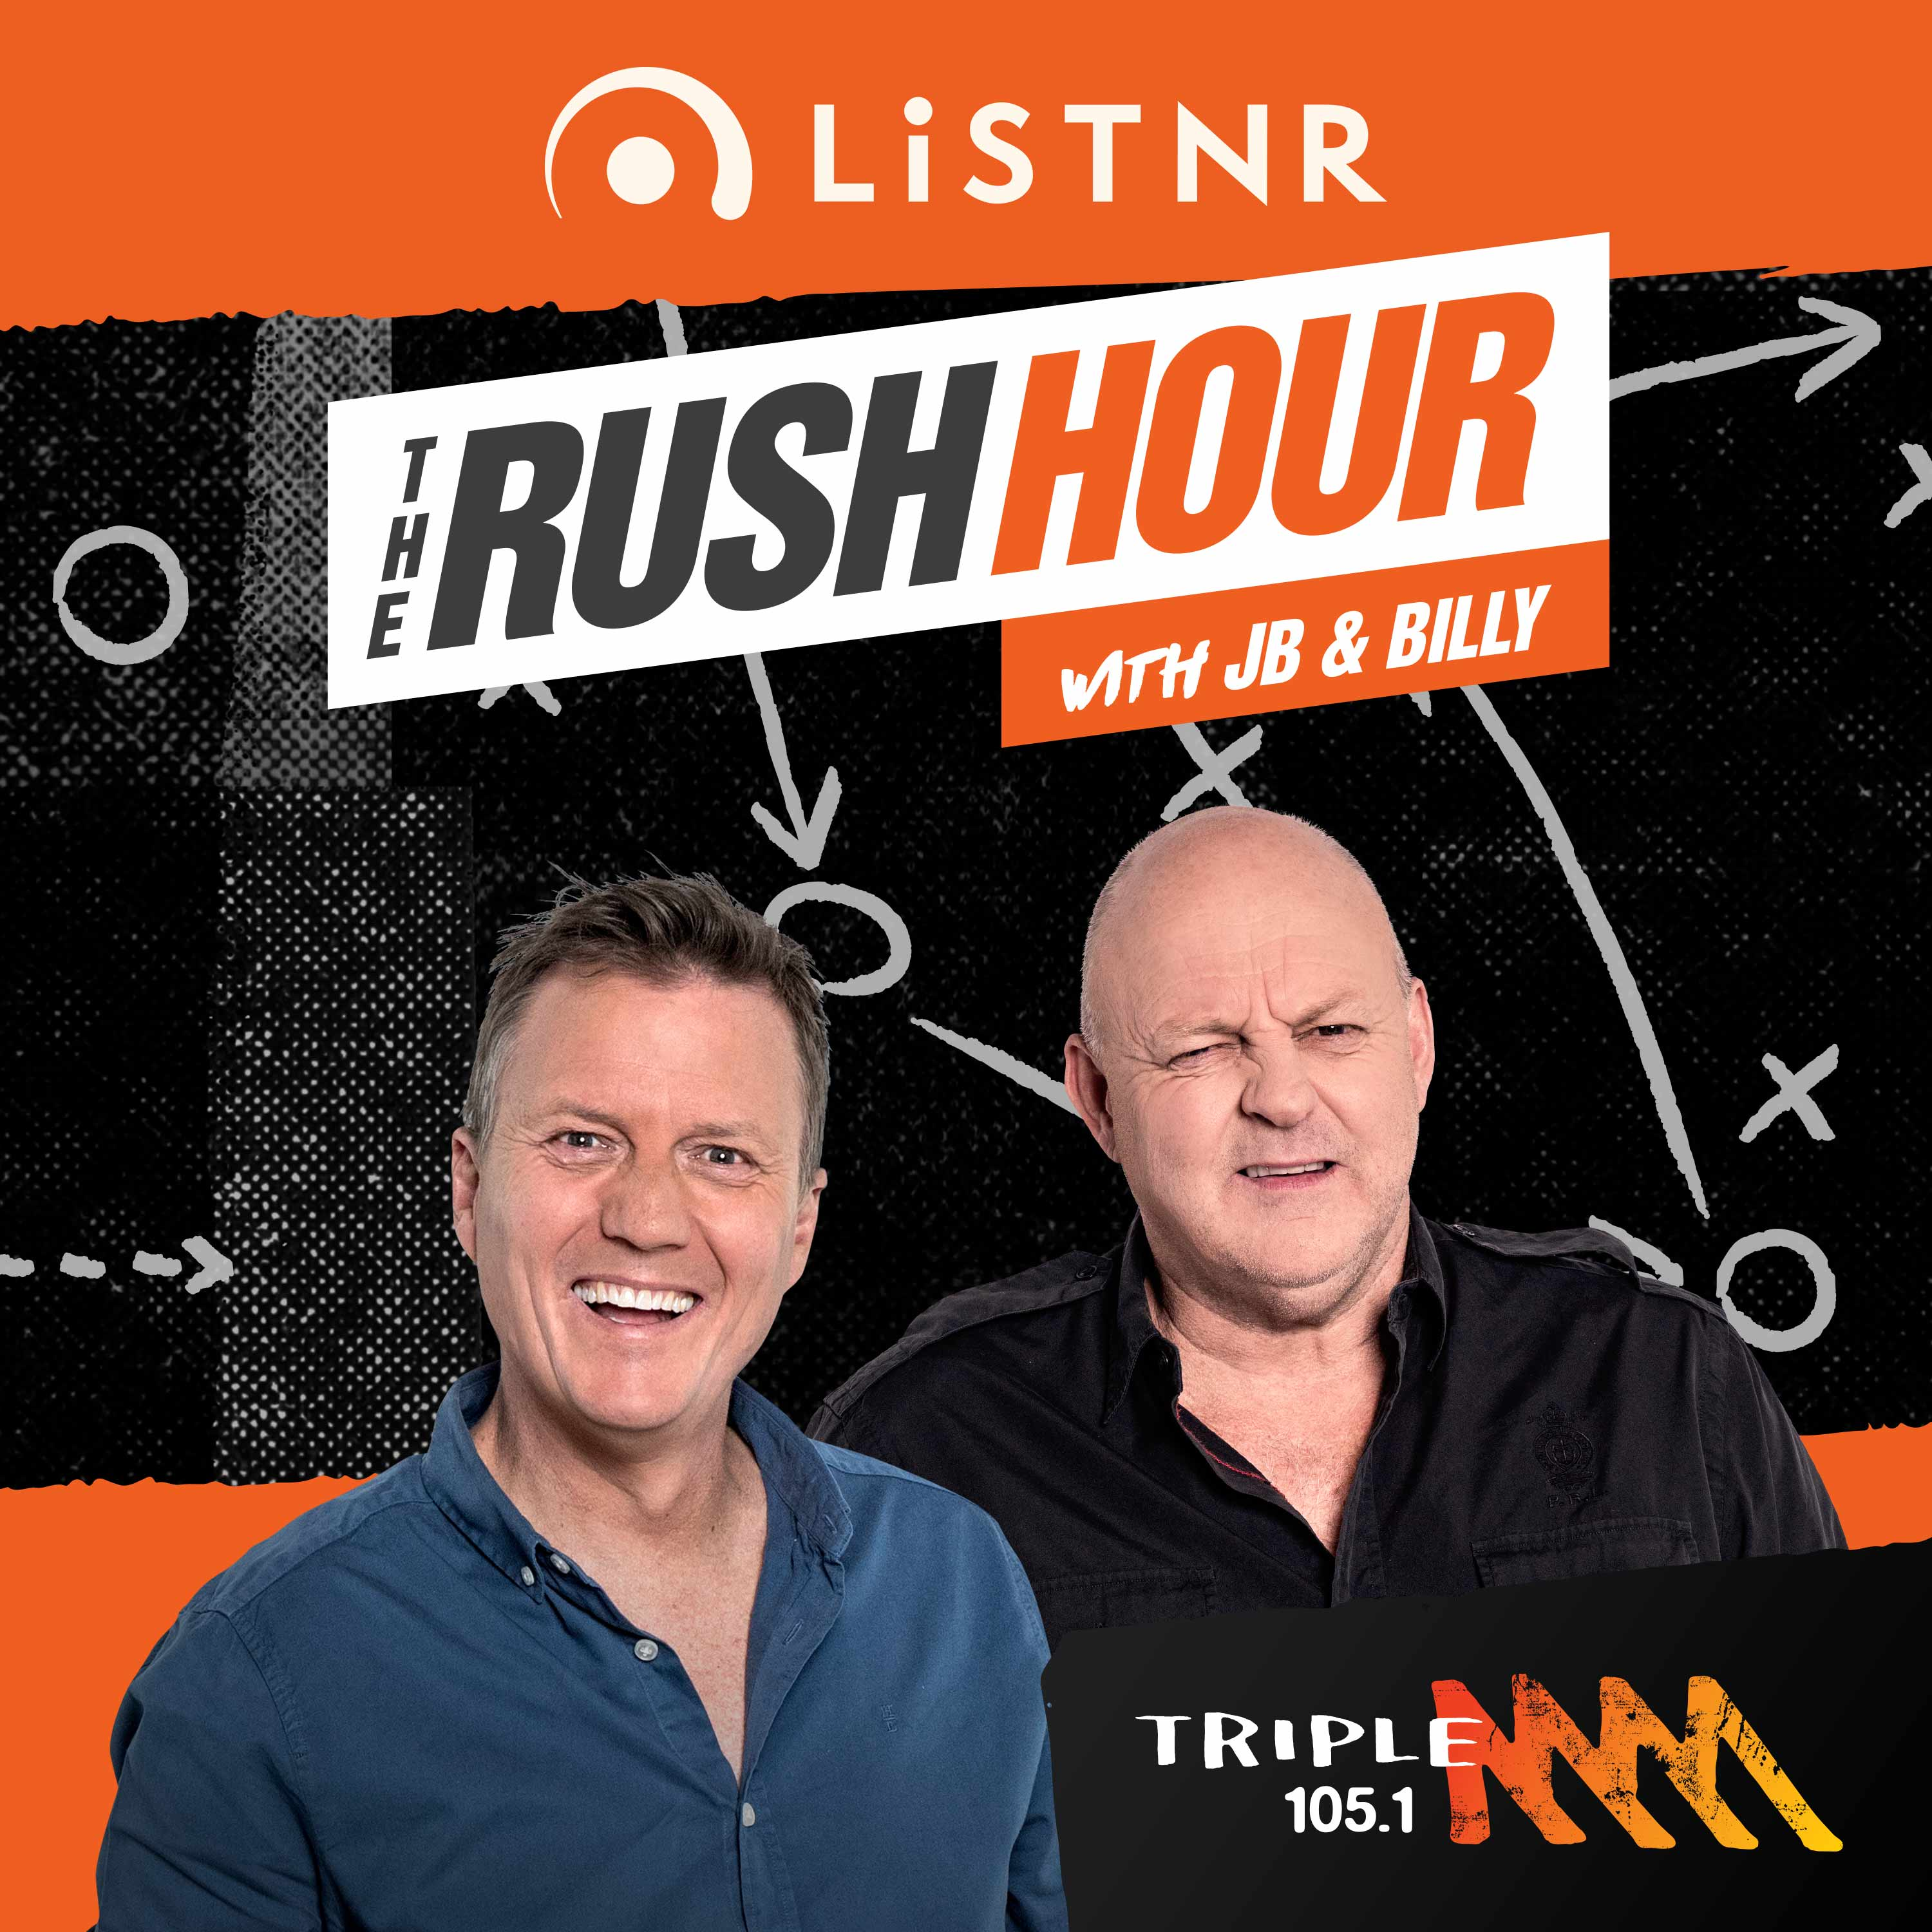 Our cheekiest quiz contestants ever, Adam Treloar controversy, Movember Ambassador Dylan Buckley - The Rush Hour Catch Up podcast - Wednesday 28th October 2020